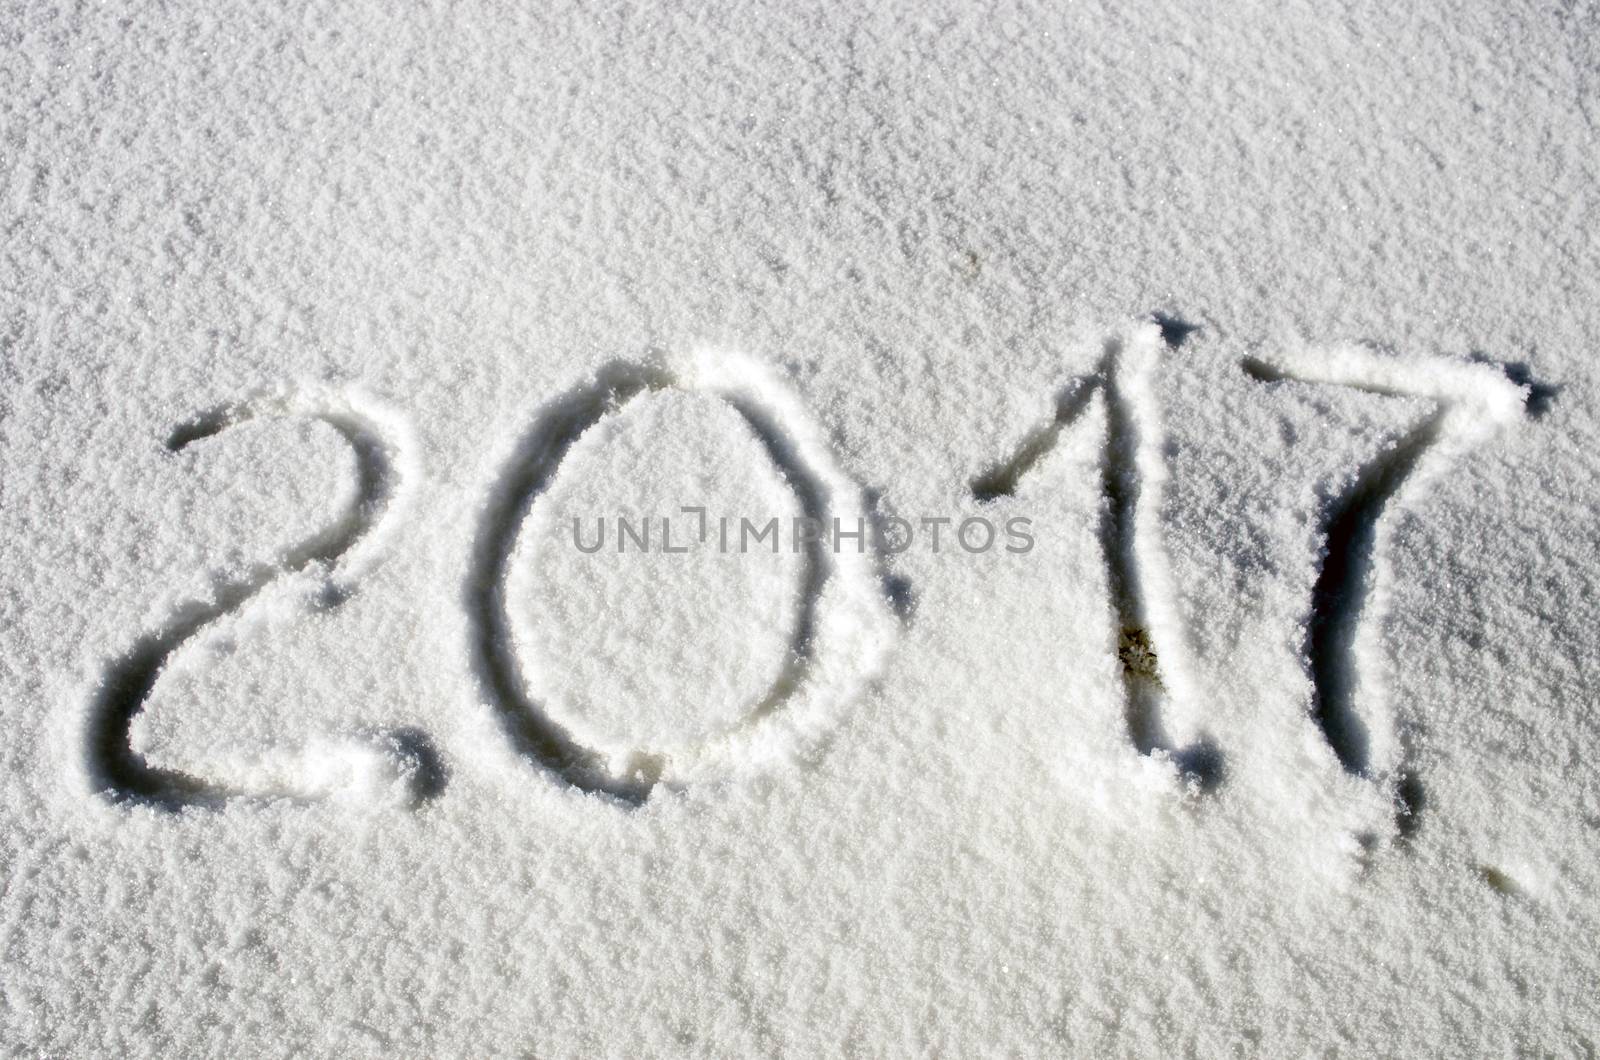 2017 on the snow for the new year and christmas